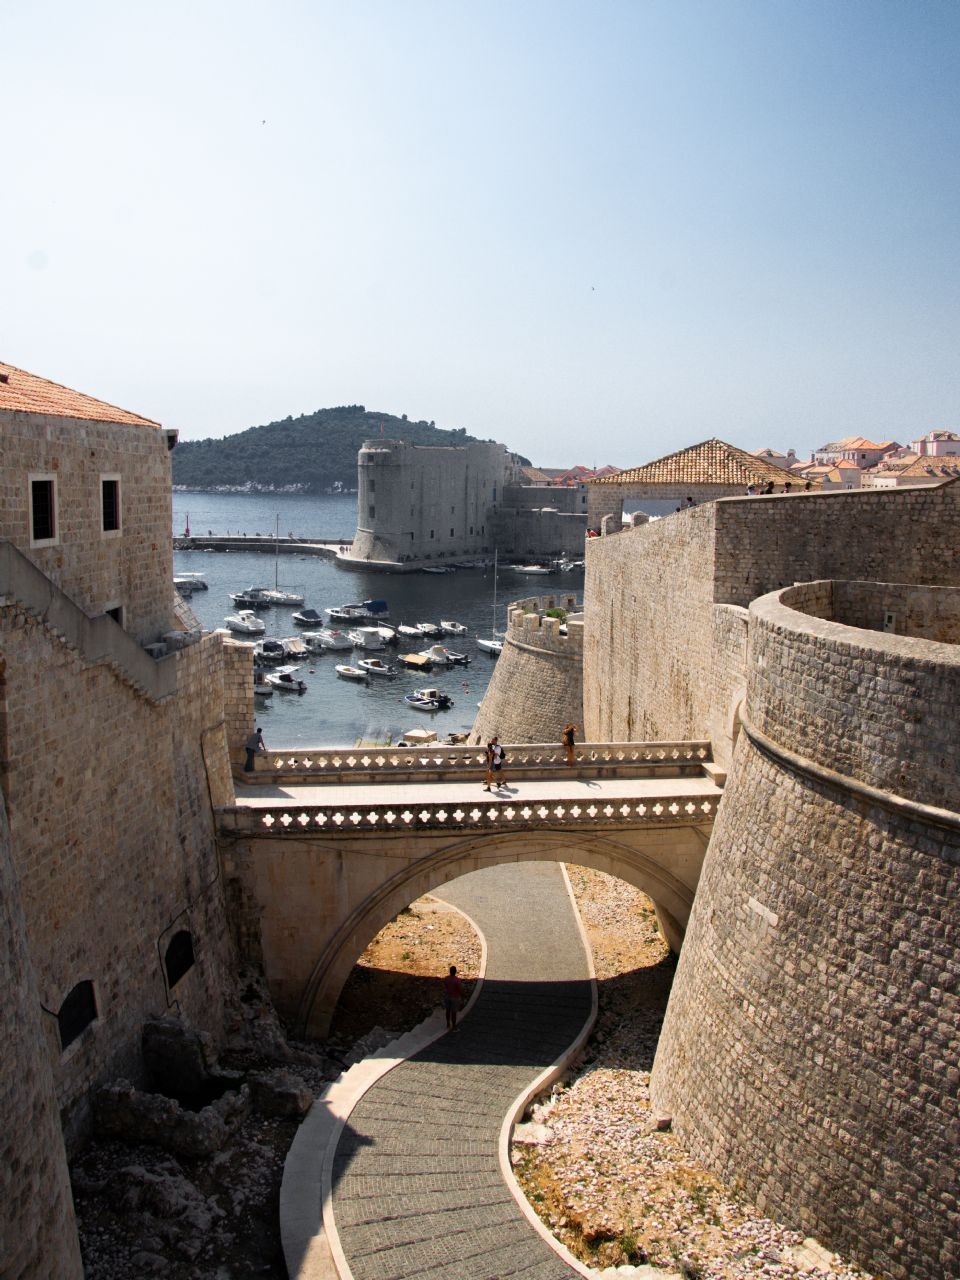 Game of Thrones Tour: Visit filming locations from the iconic TV series and immerse yourself in the world of Westeros.